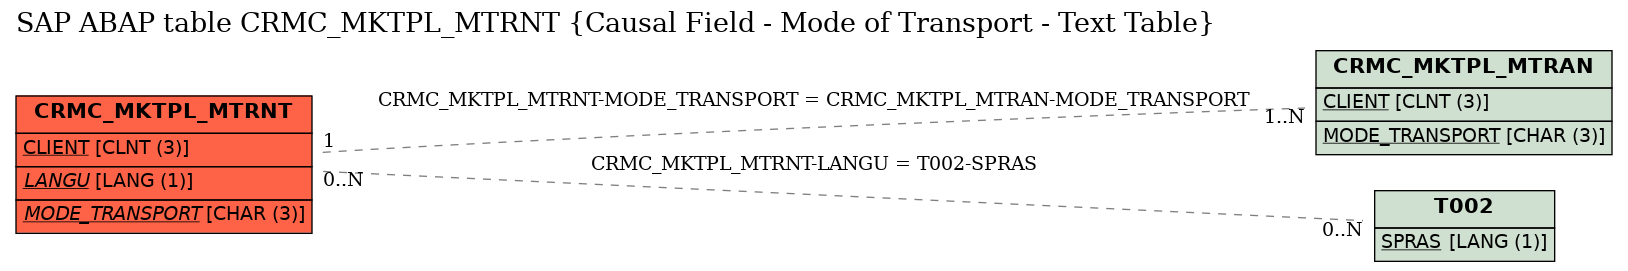 E-R Diagram for table CRMC_MKTPL_MTRNT (Causal Field - Mode of Transport - Text Table)